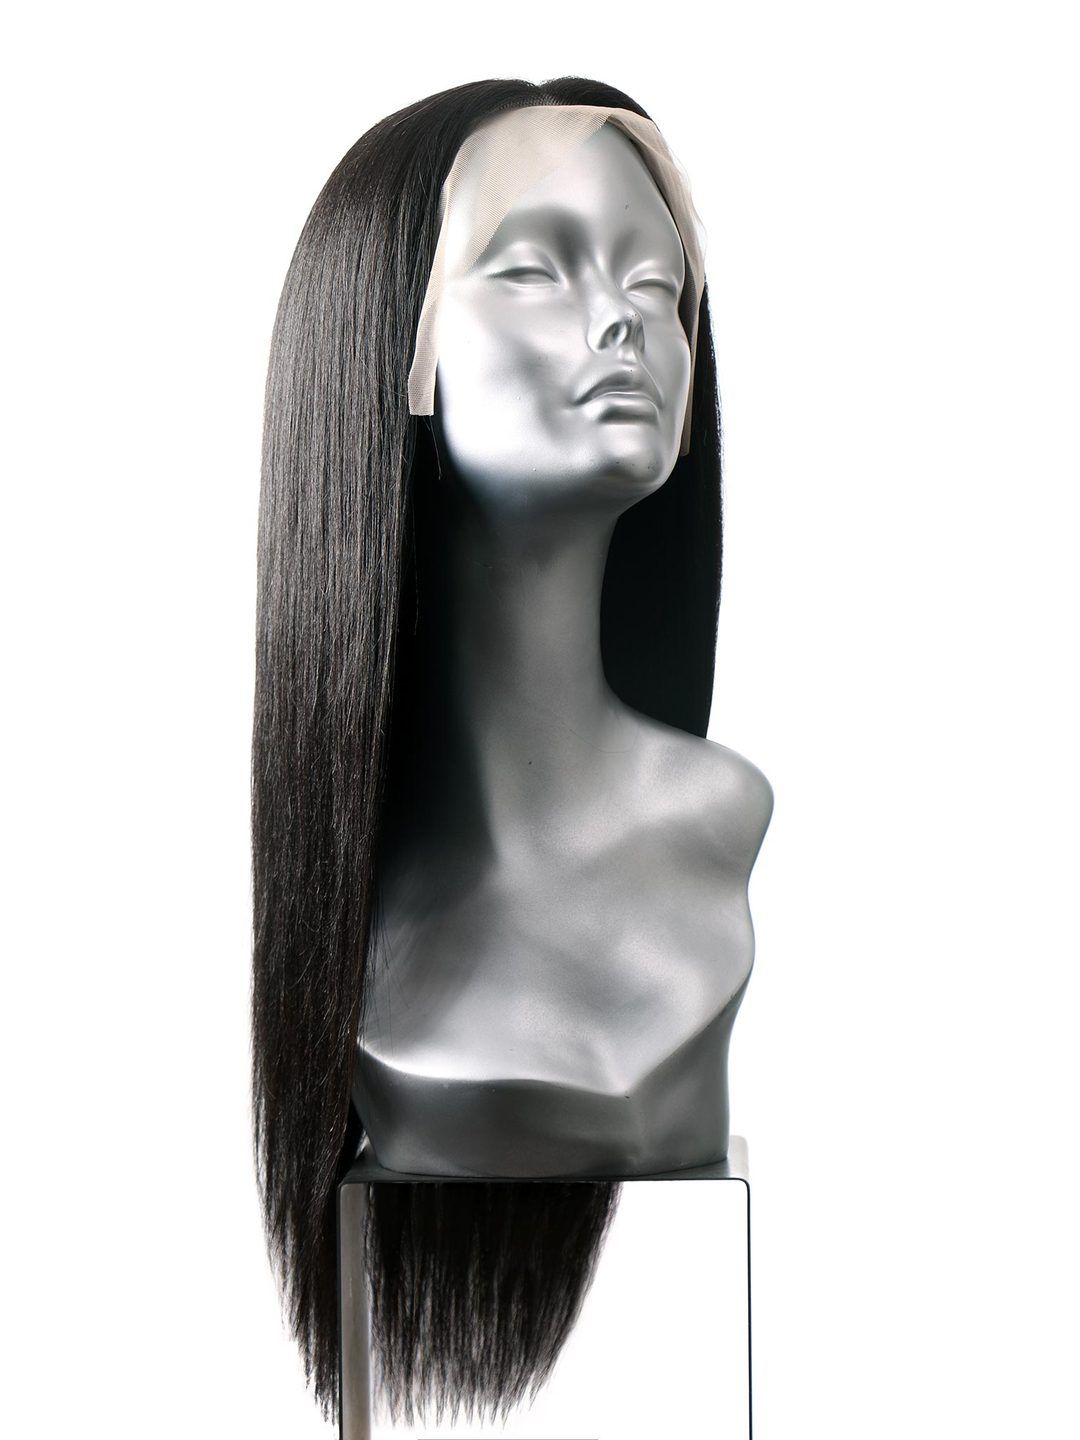 How to Find the Best Wigs Online: Top Human Hair, Lace Front & Synthetic  Wigs